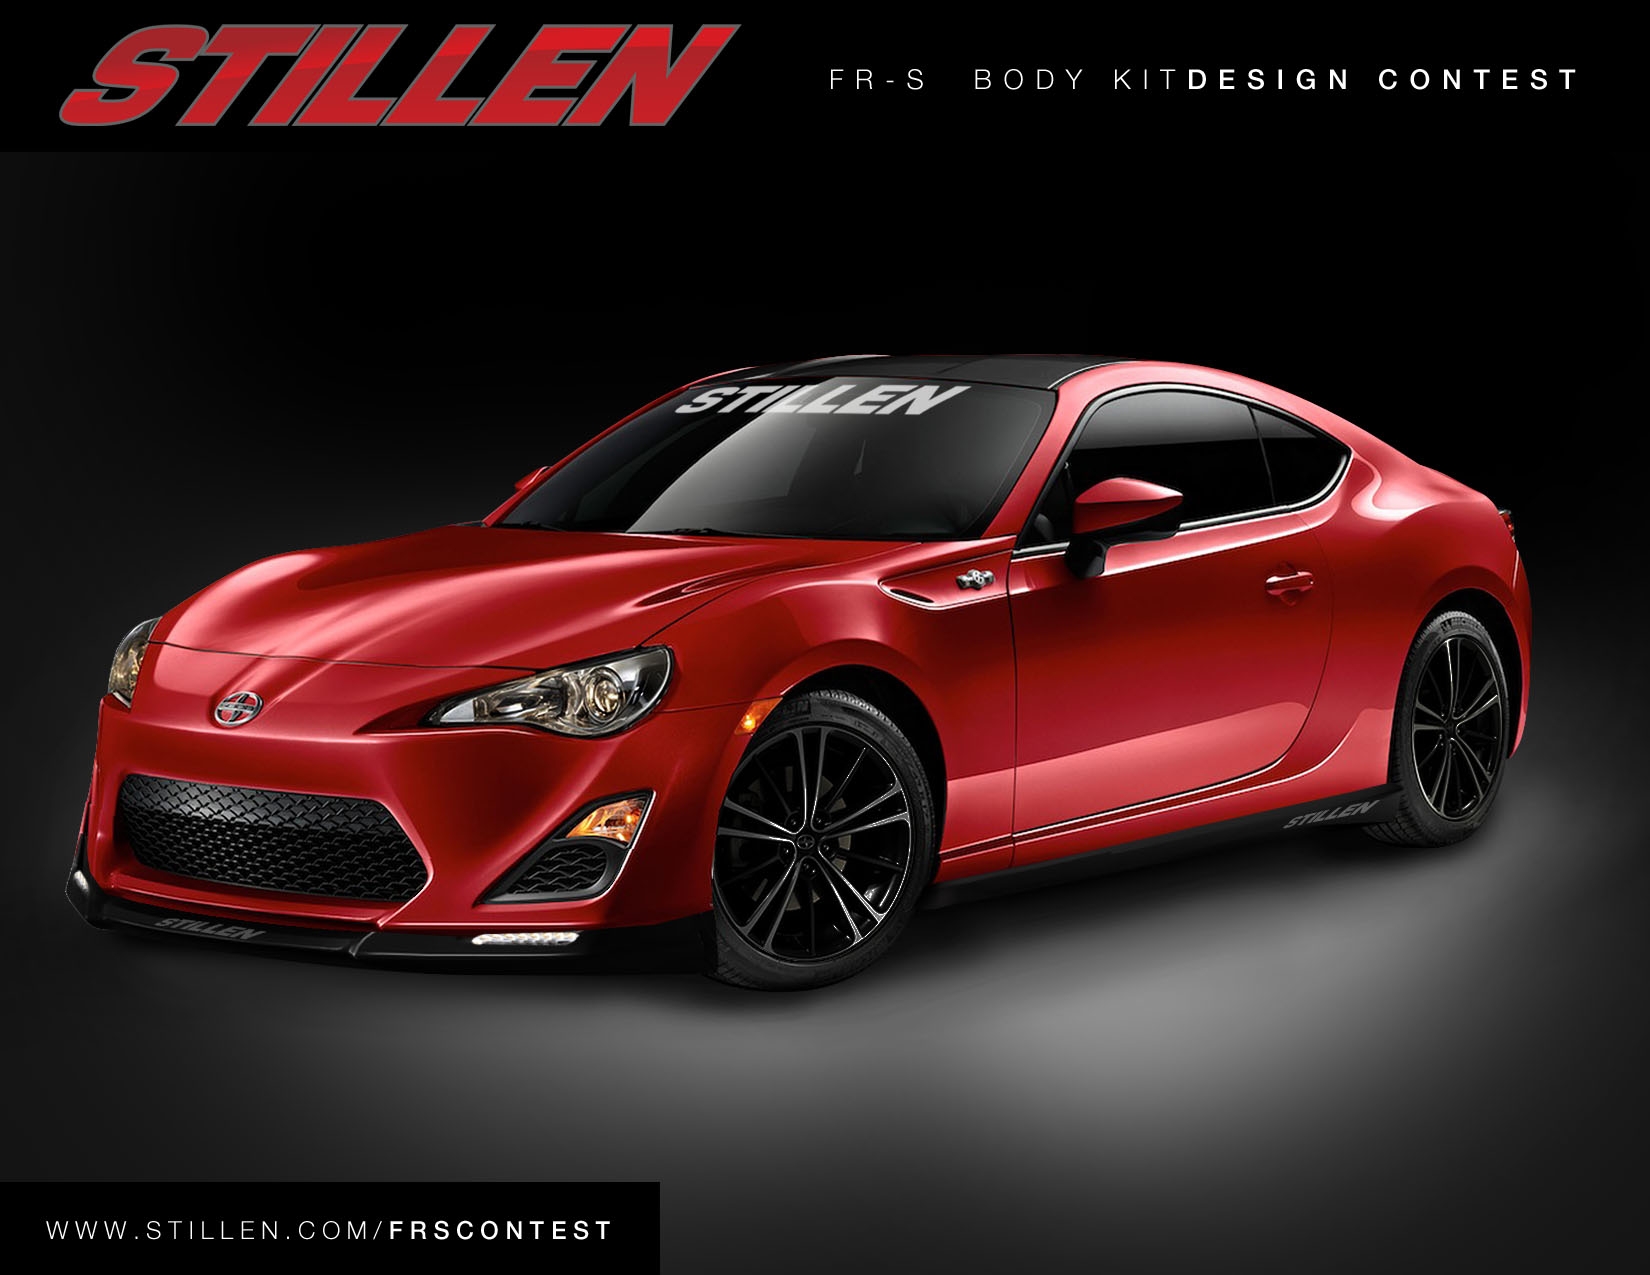 Michael Caneda's FRS Contest Entry